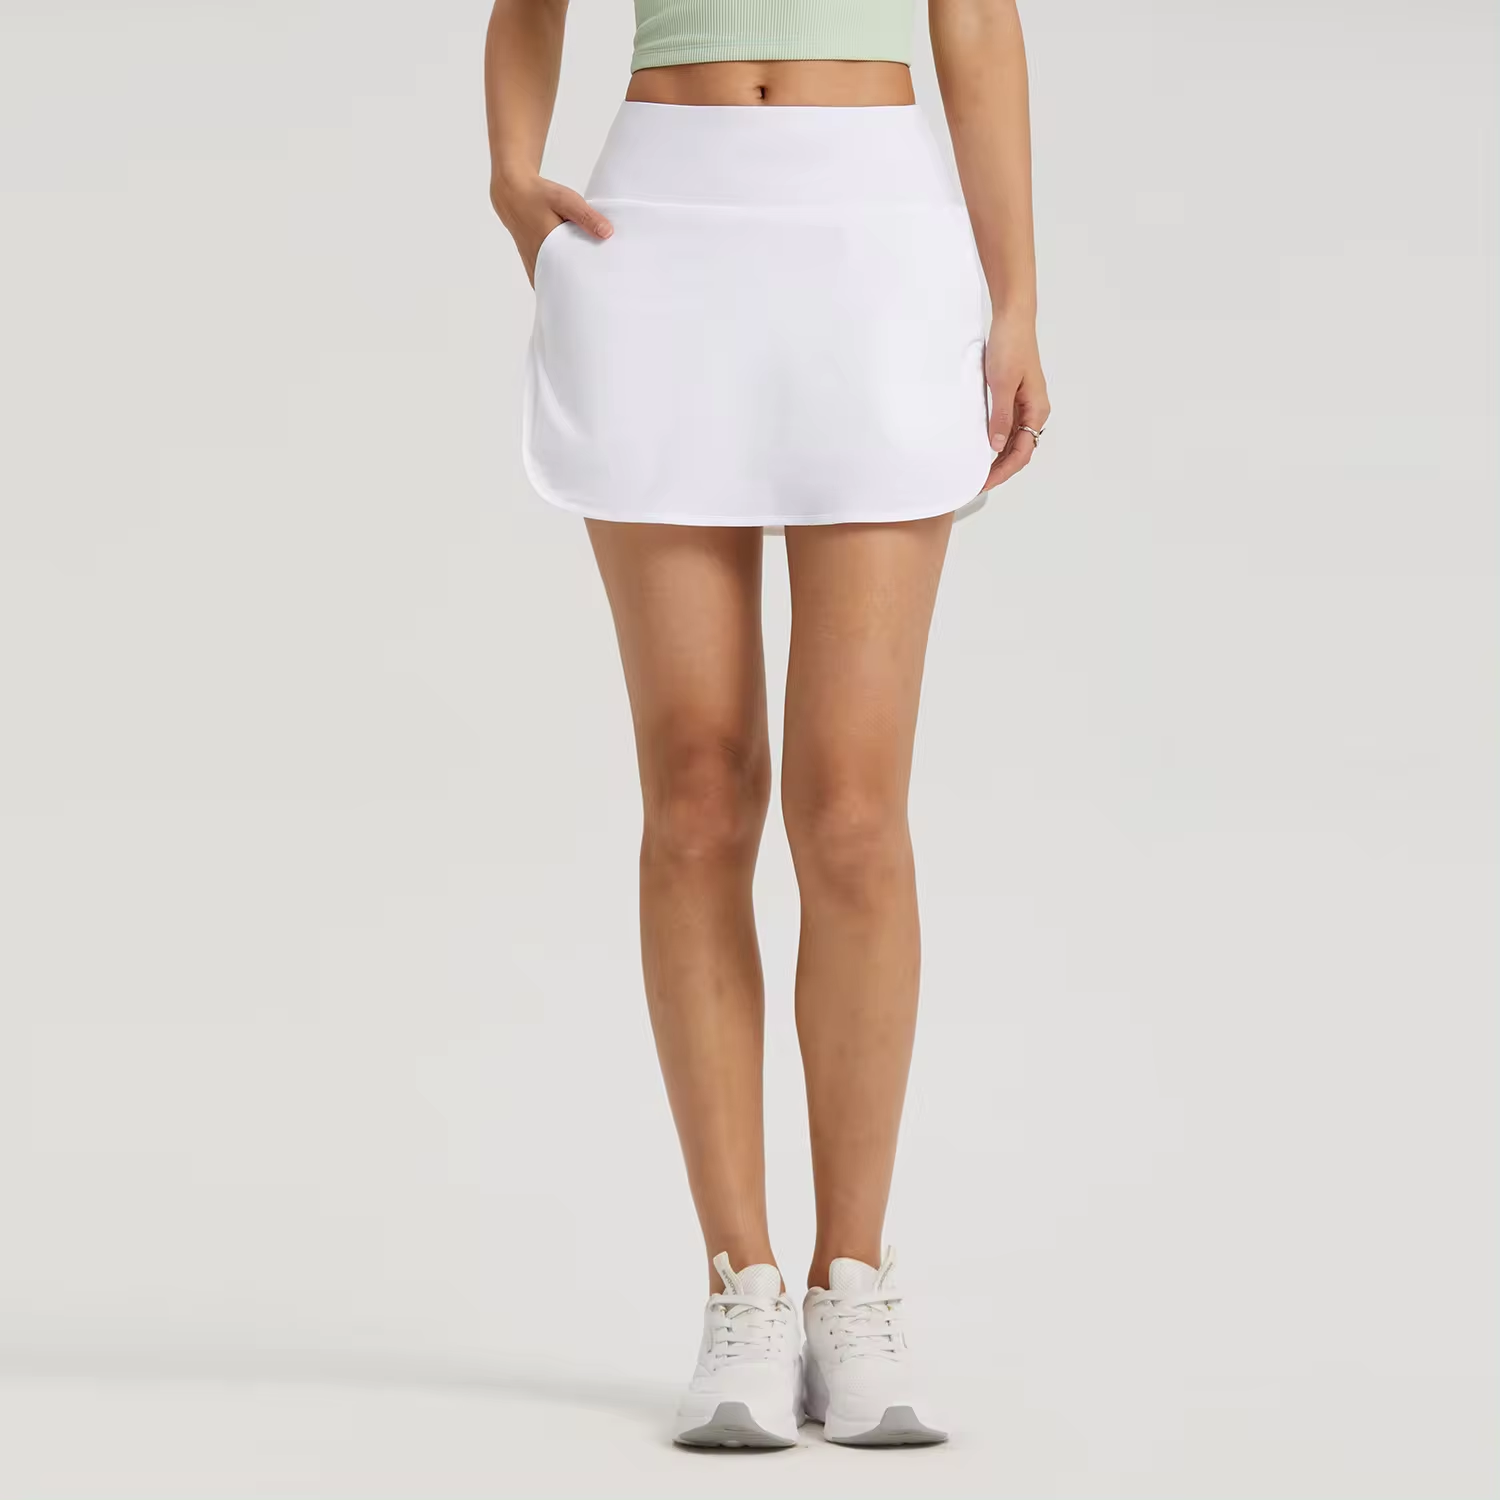 Breathable Sports Yoga Shorts With Skirt